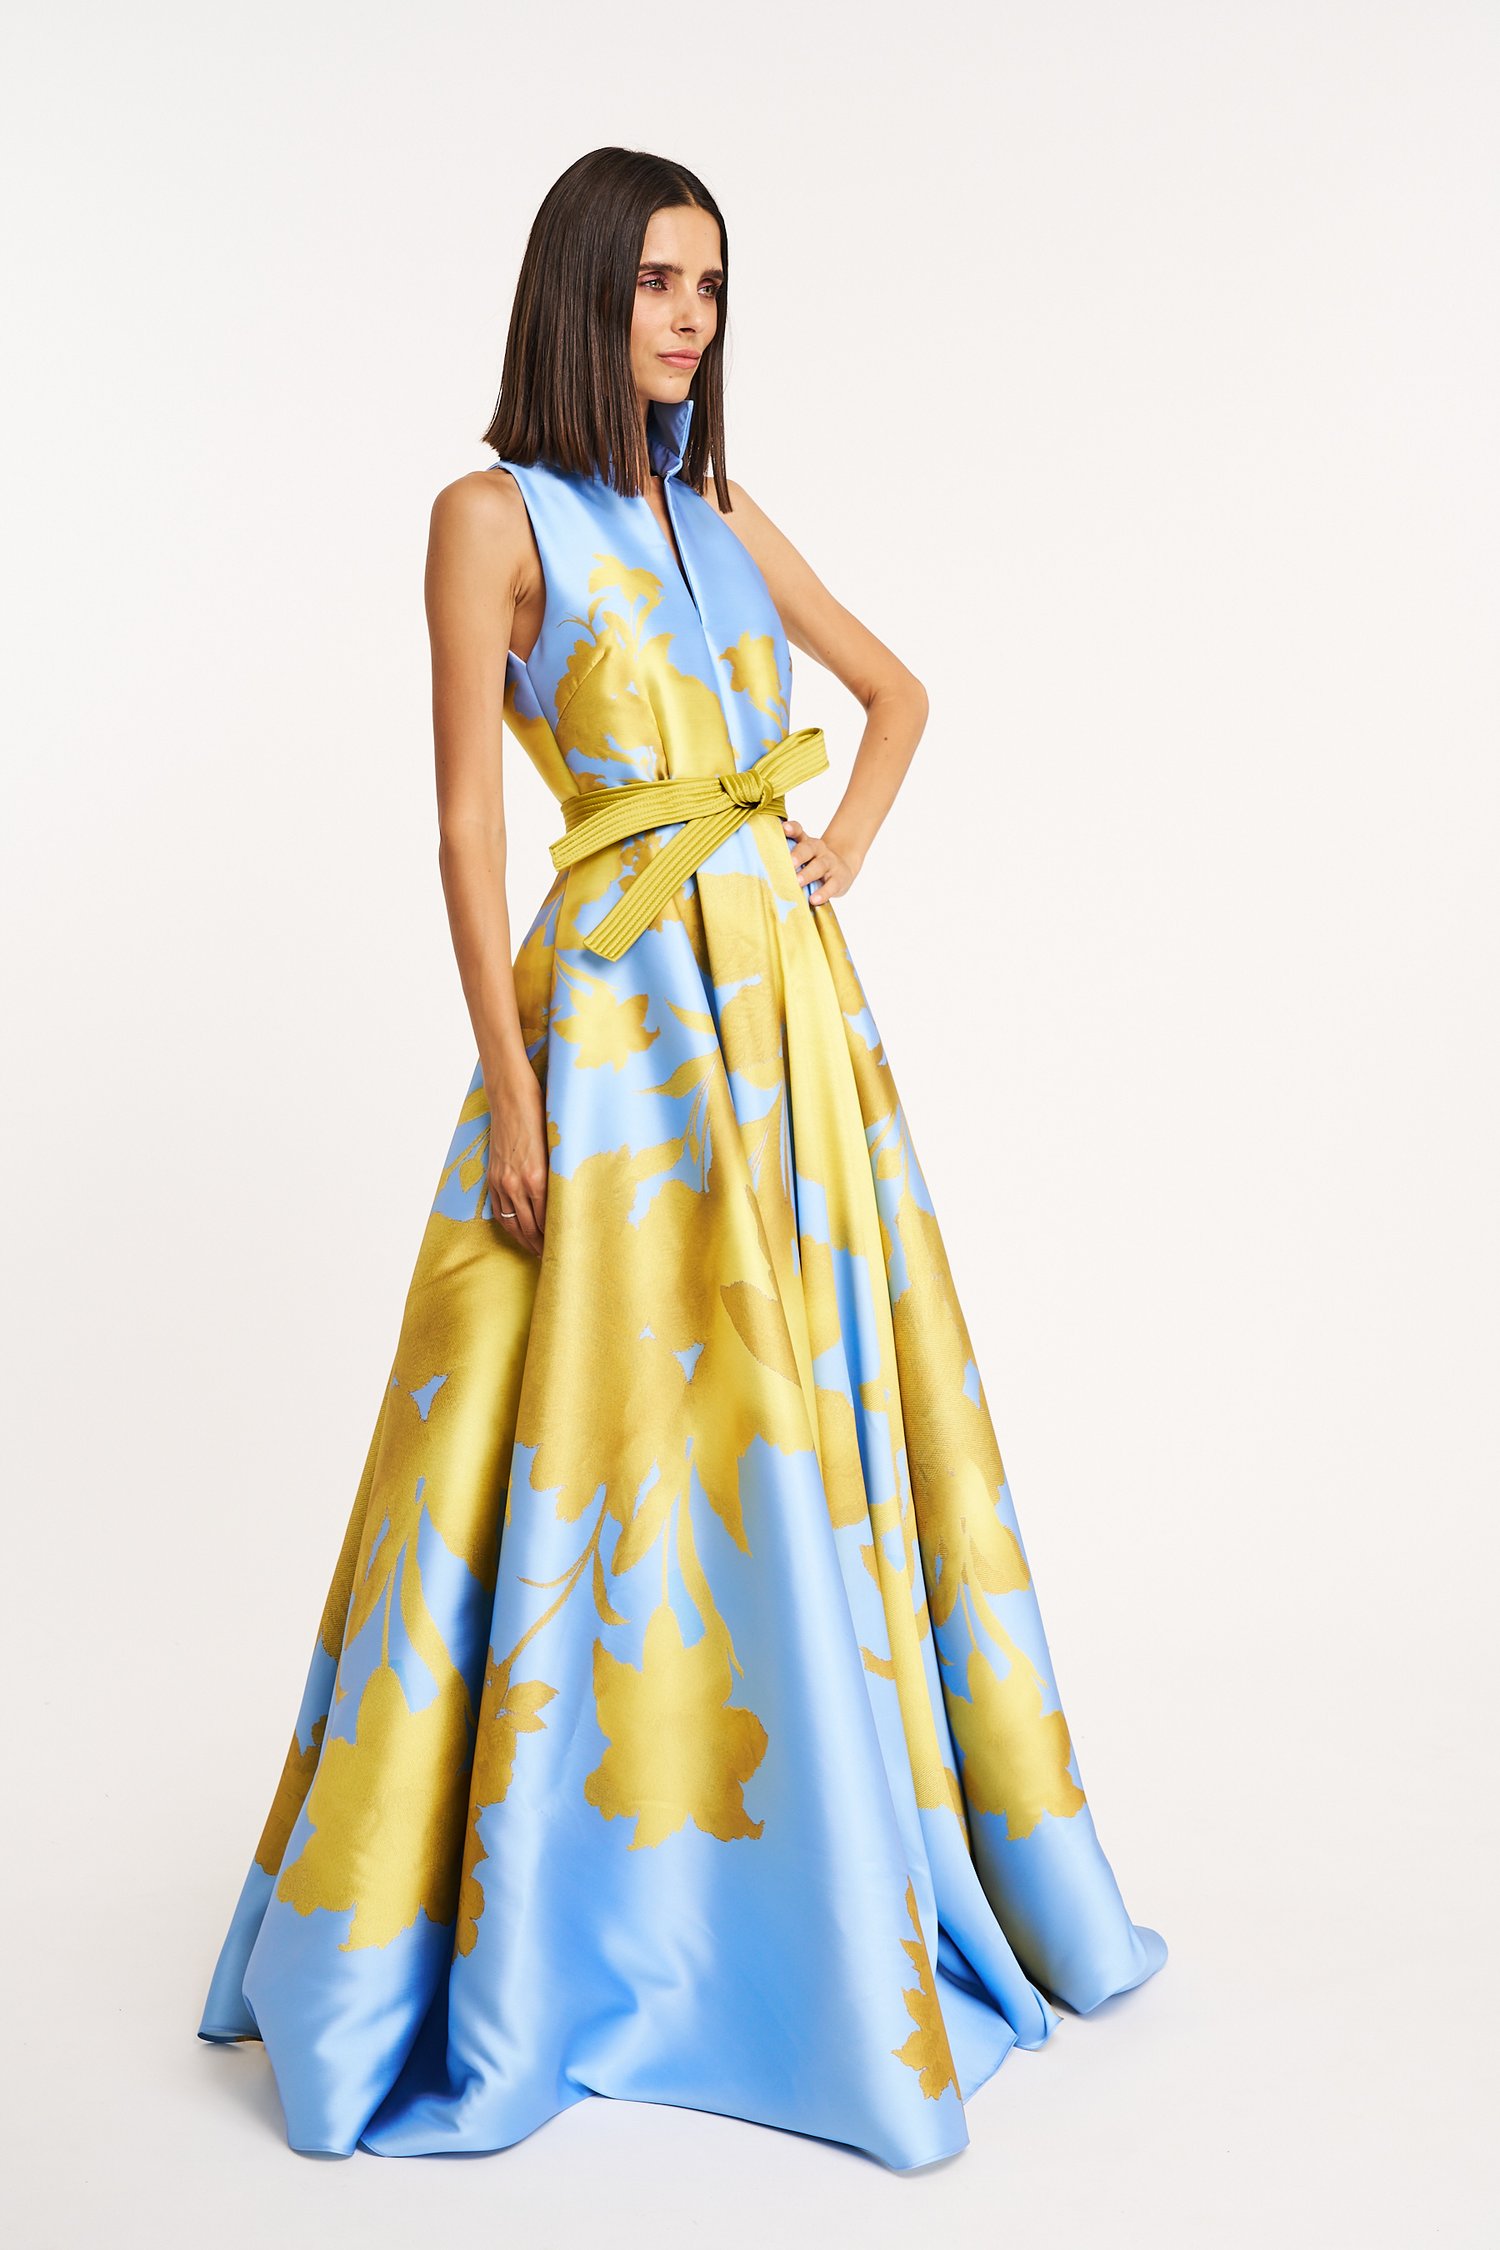 Periwinkle and Gold Floral Print Shirt Gown — Verdavainne